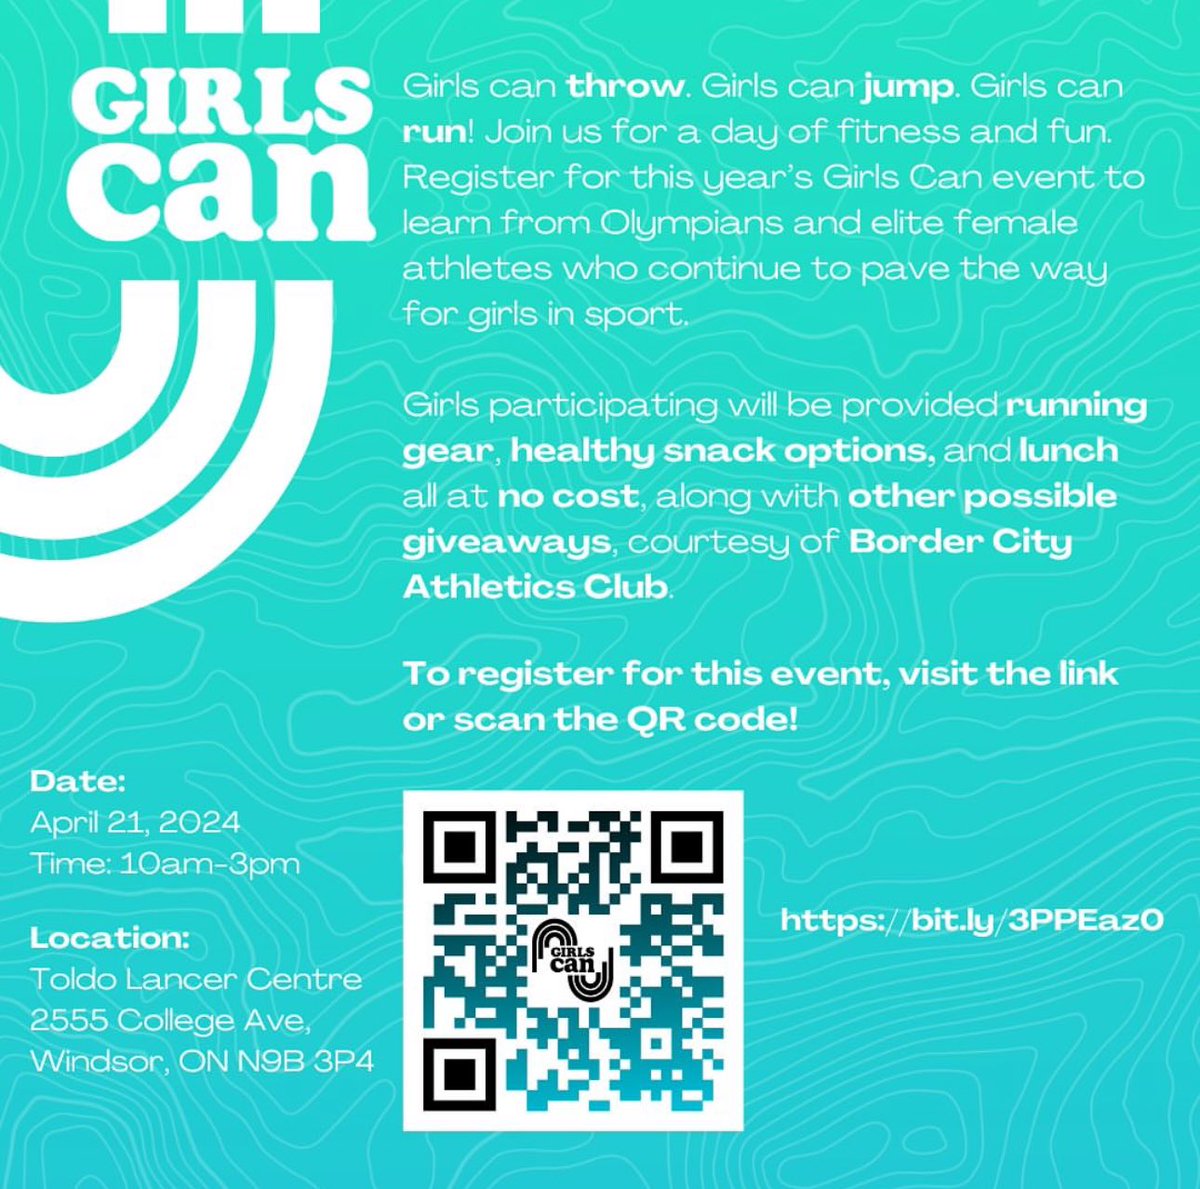 #GirlsCan Sunday April 21st 10am-3pm @ Toldo Lancer Centre. Girls 10-15 Can -Olympians 🥇 - free lunch 🍽️ - gear & swag 😎 - fun,fitness-filled day 👟 #GirlsCan Supports Black,Indigenous, & underrepresented girls but welcomes all girls. 🔗: bit.ly/3PPEaz0 #TheCityAC